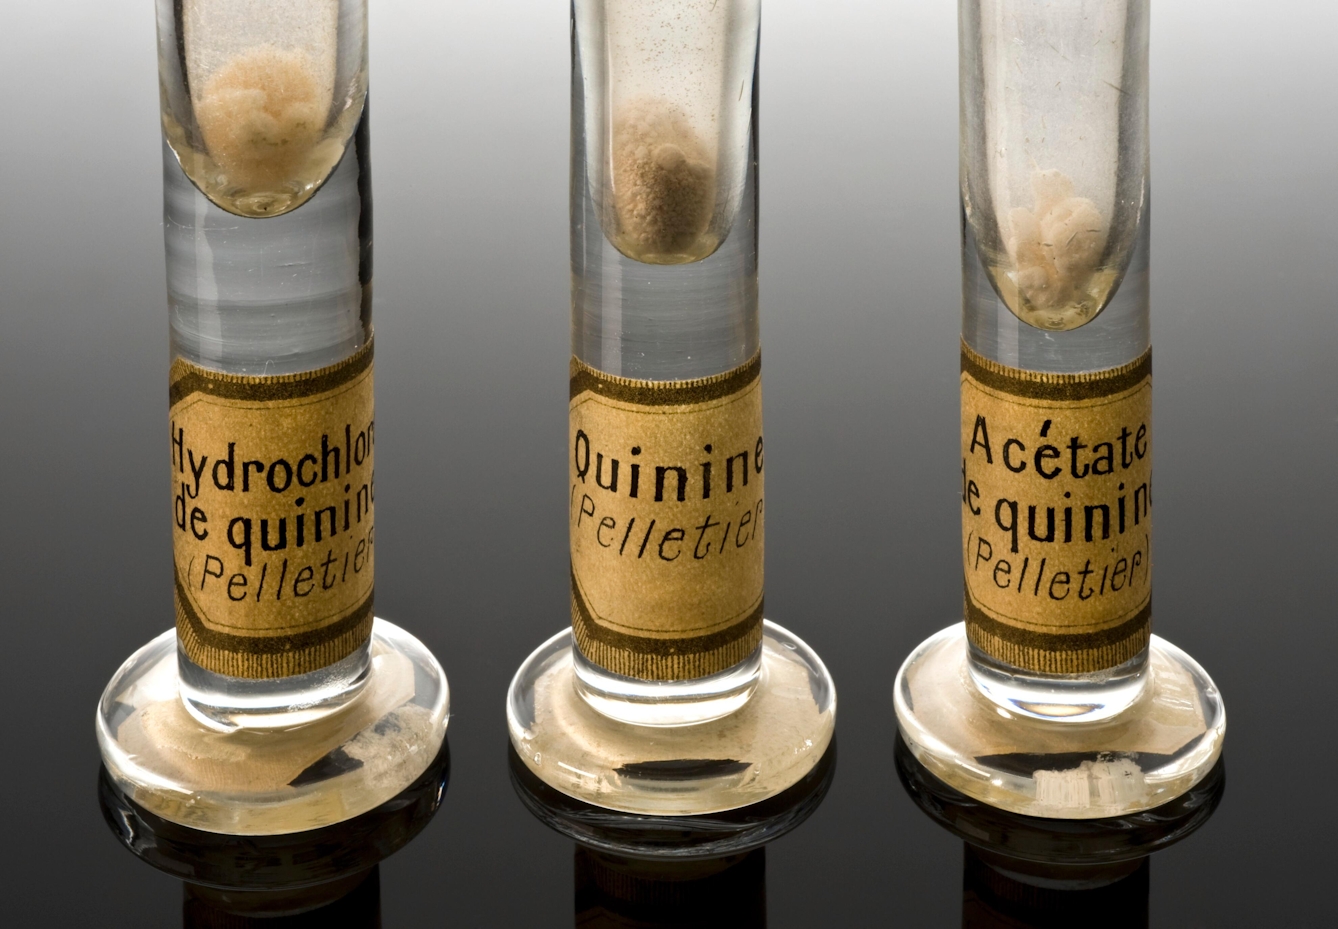 Three old test tubes in a row labelled  Hydrochloride quinine (Pelletier), Quinine (Pelletier) and Acetate de quinine (Pelletier). All the test tubes have white/grey sediment deposited in a clear liquid suspension. Colour photograph.